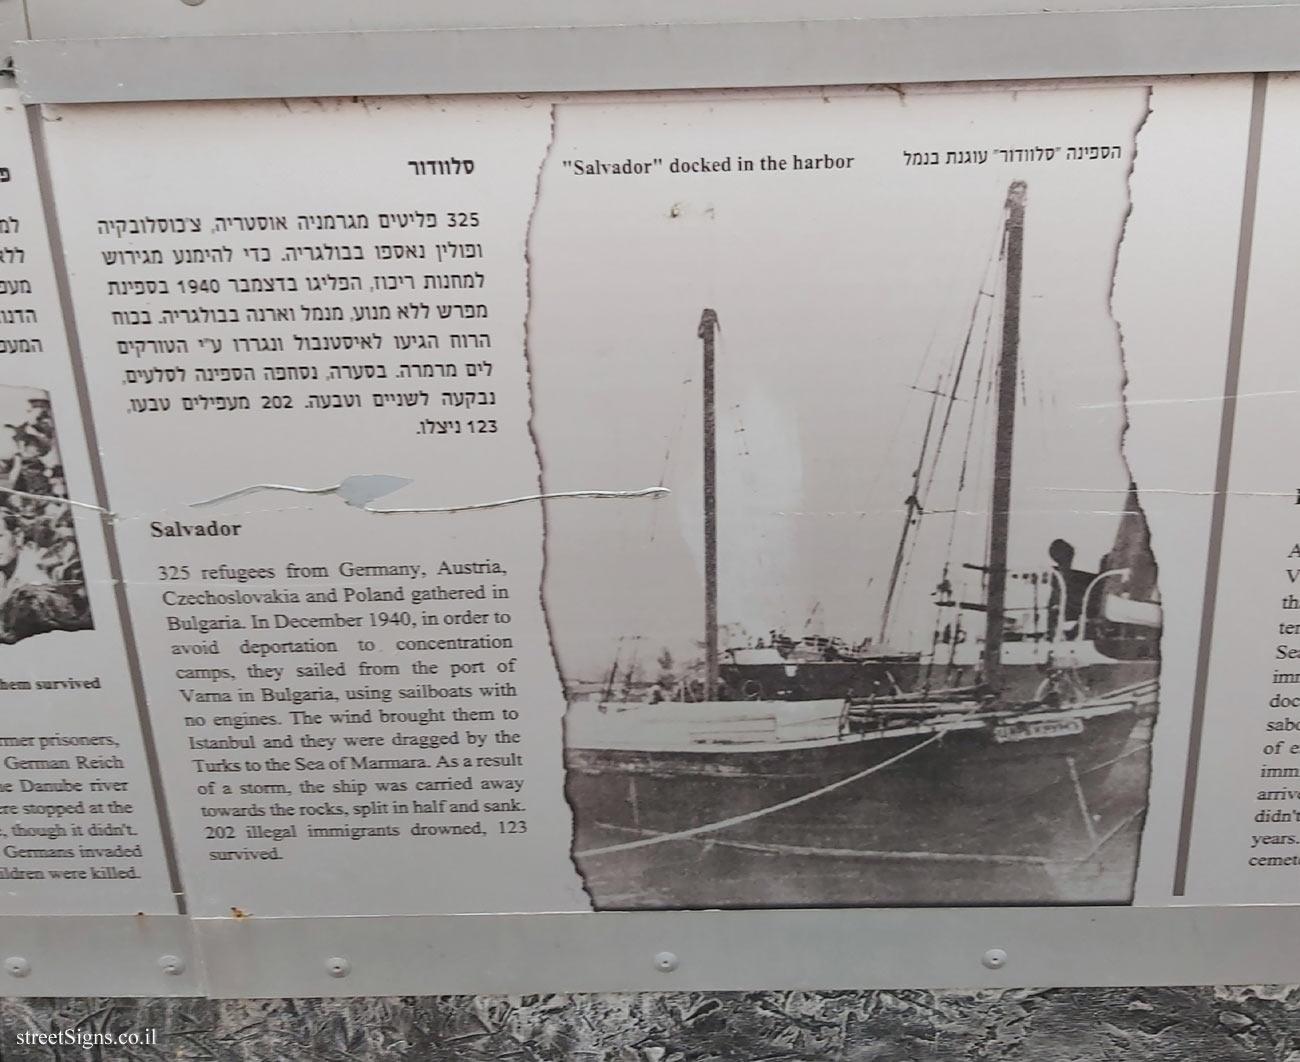 Tel Aviv - London Garden - The story of the illegal immigration - The ship "Salvador"